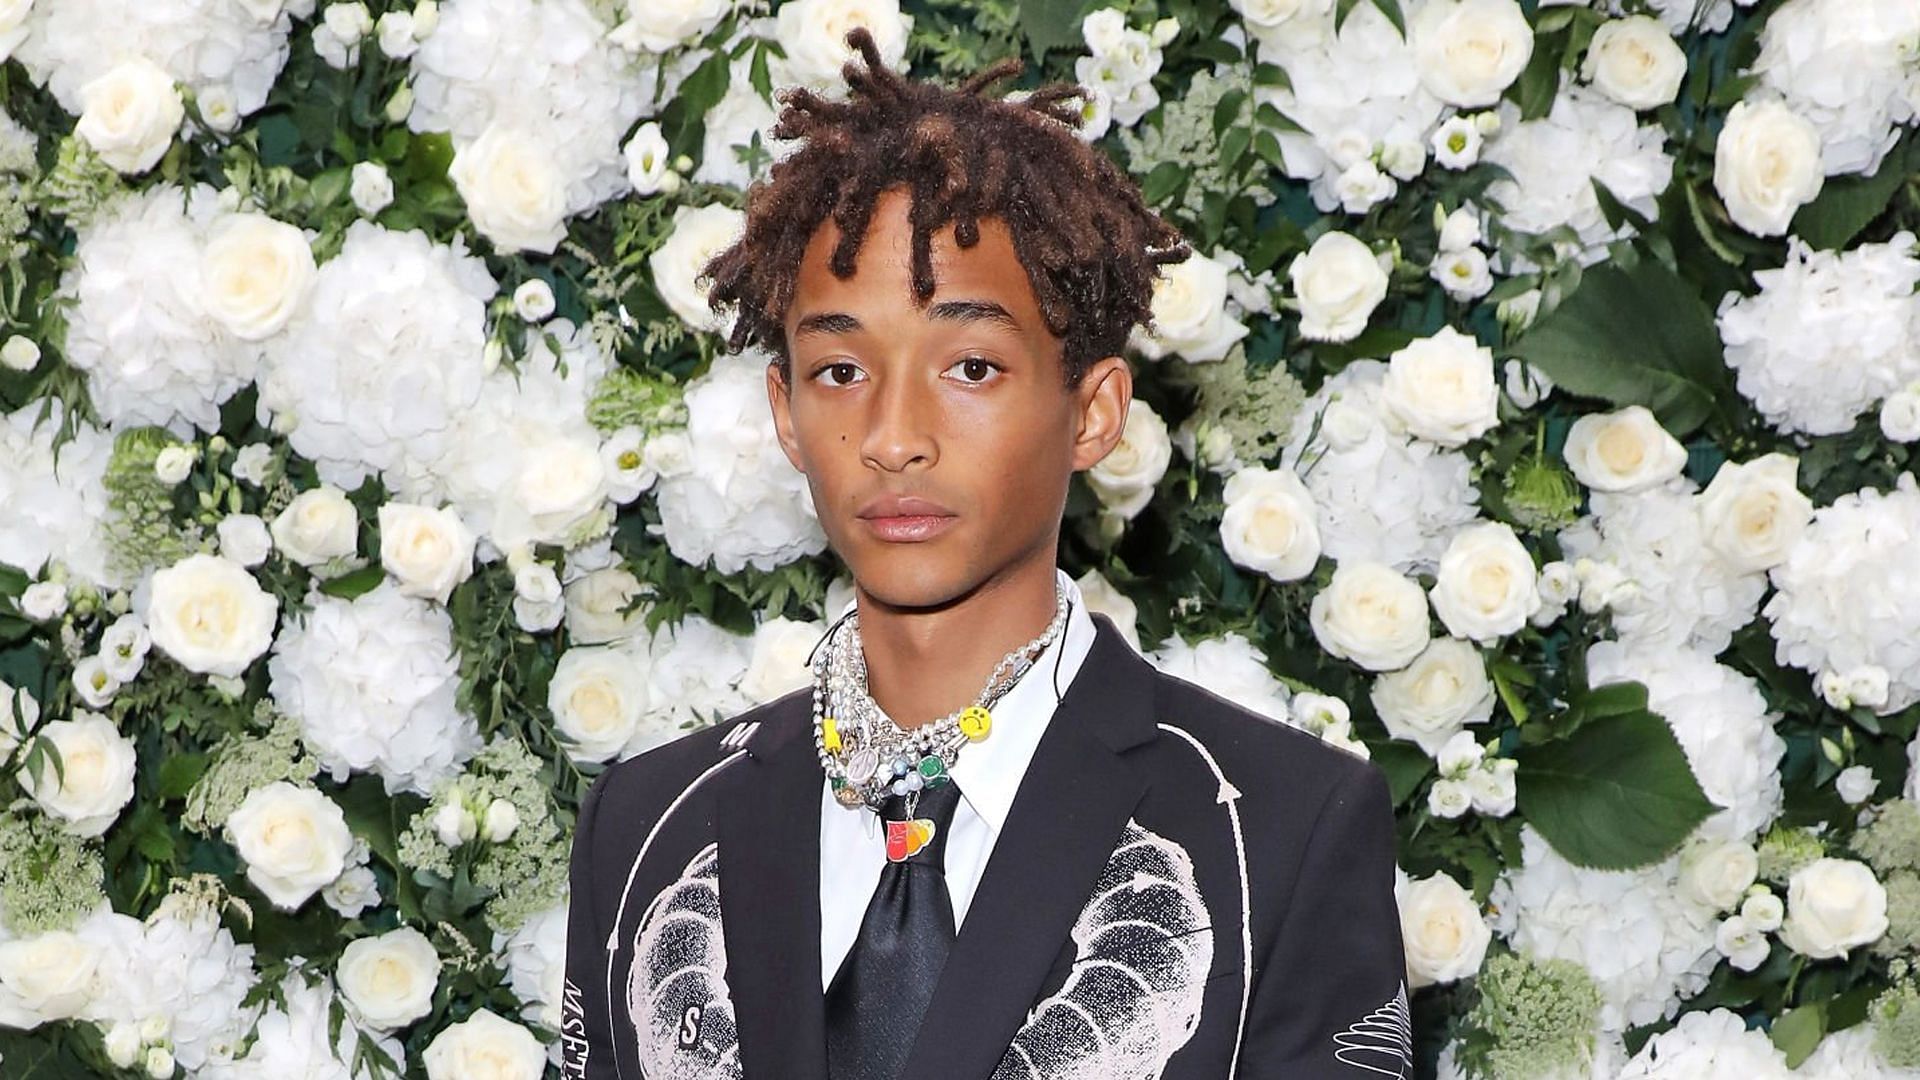 Jaden Smith can be seen crying in his recent social media post (Image via Getty Images)